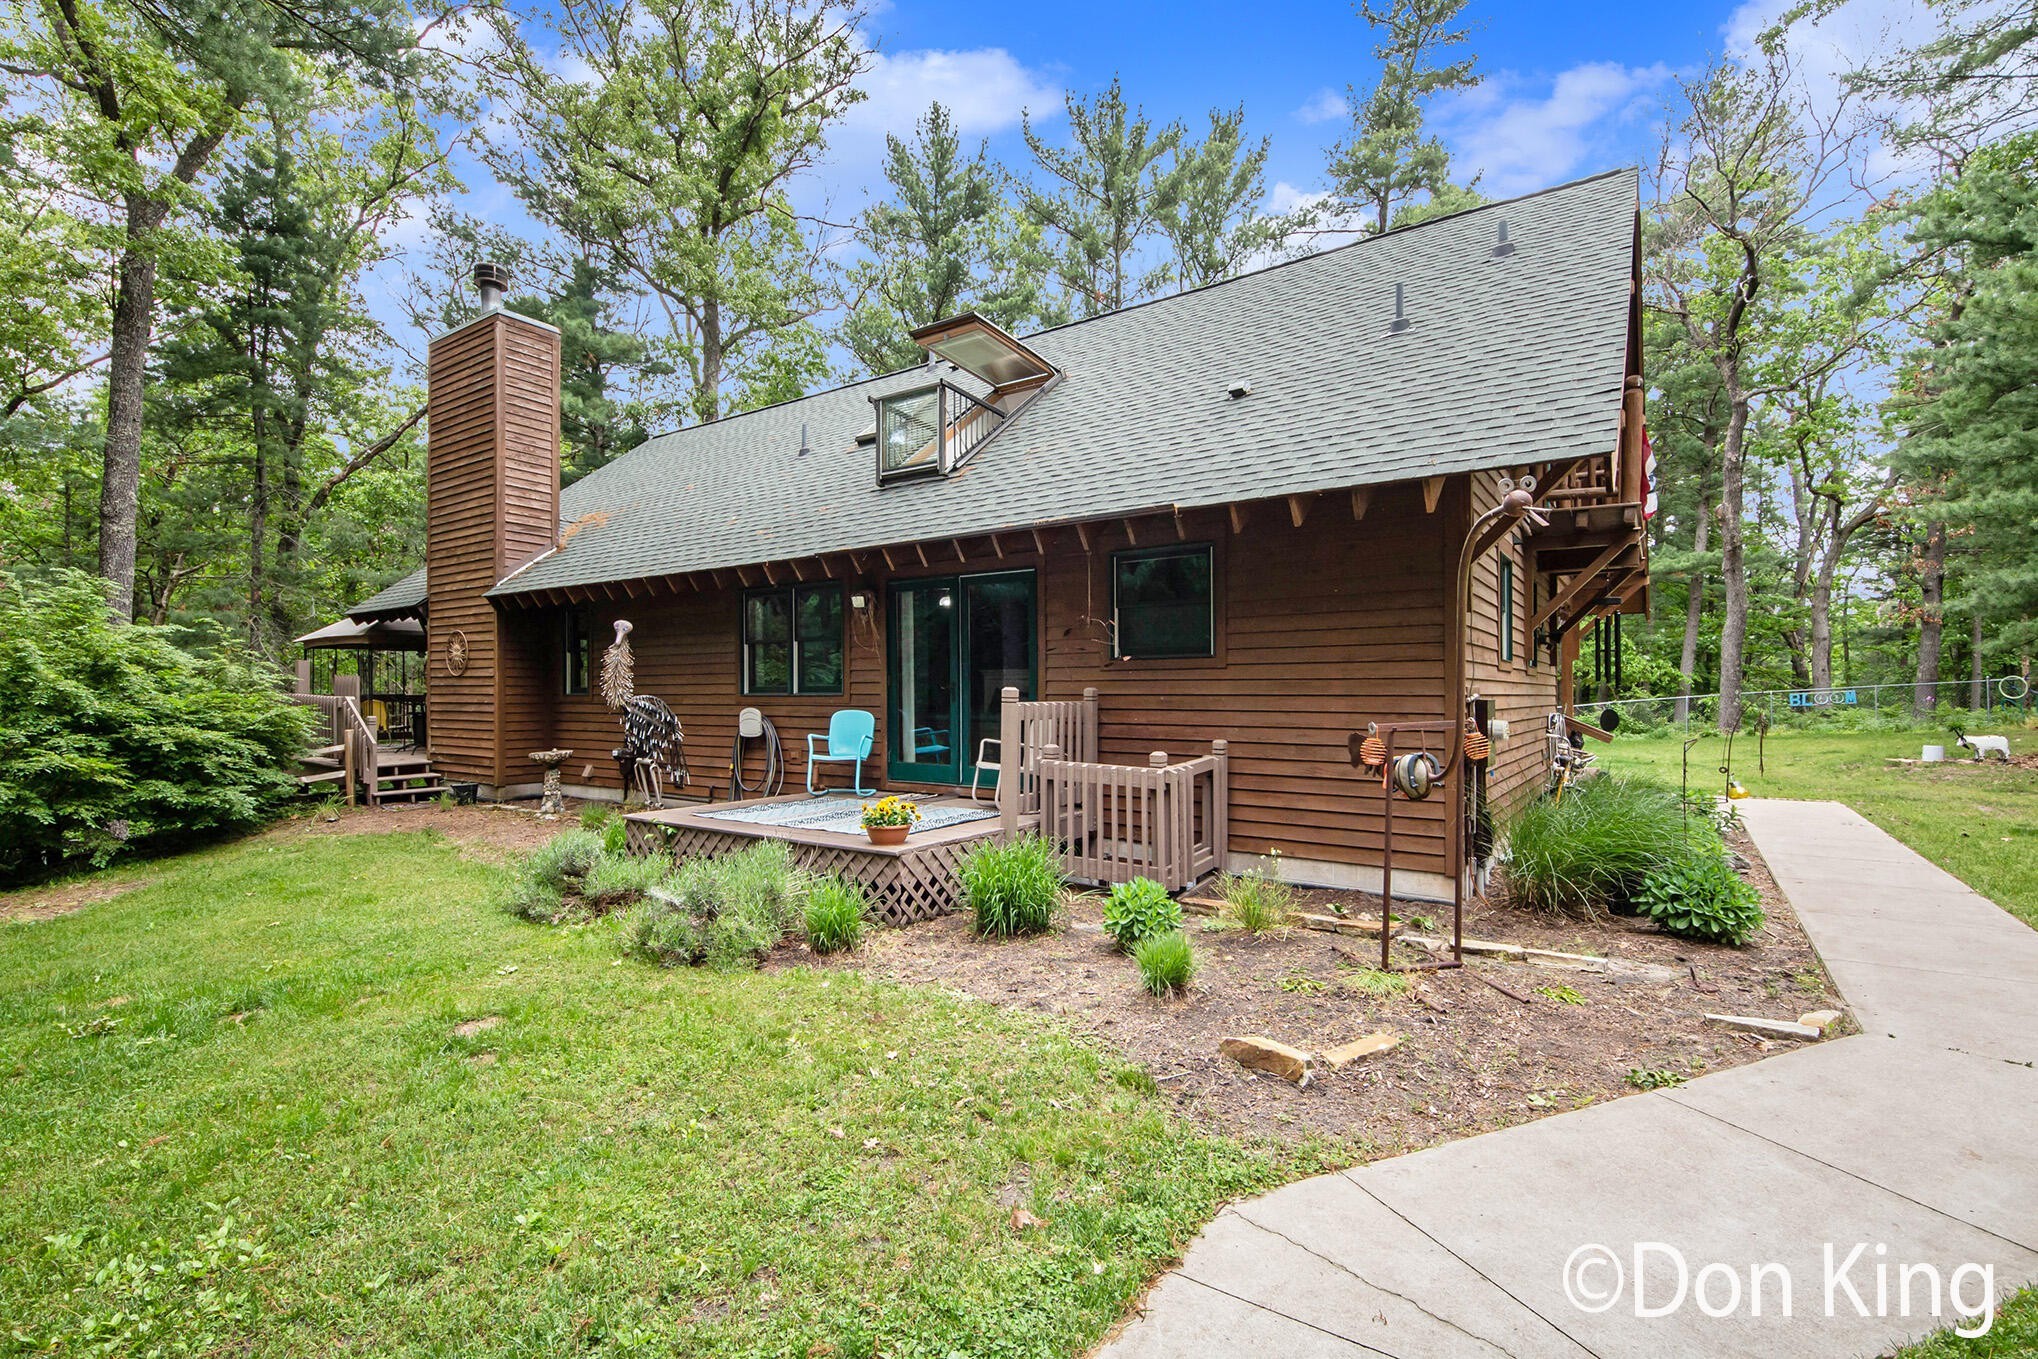 2. 6111 Holton-Duck Lake Road